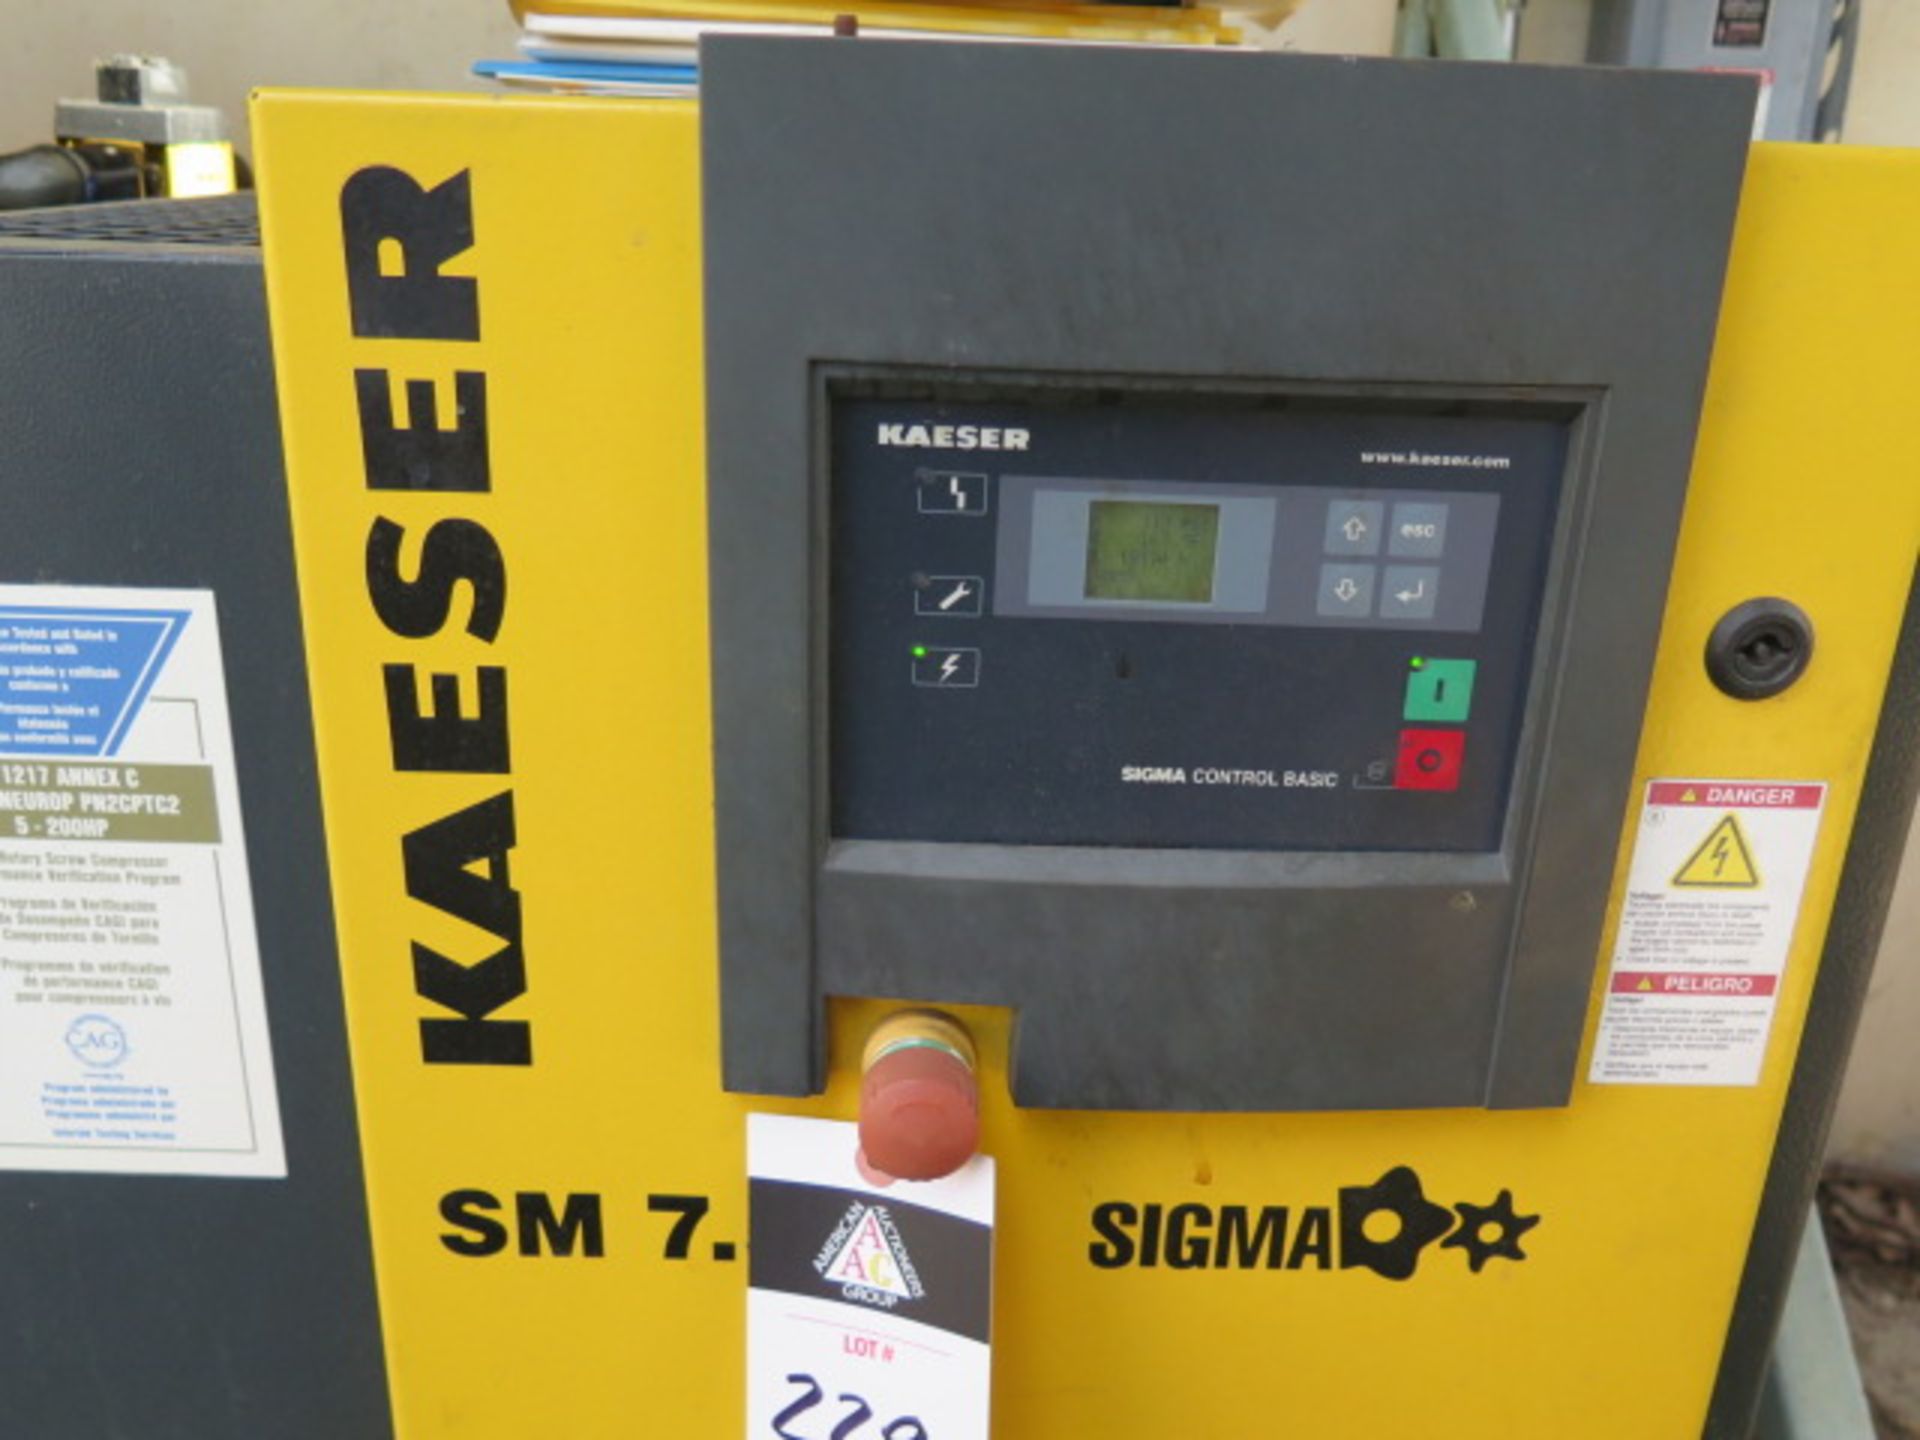 2015 Kaeser SM7.5 7.5Hp Rotary Air Compressor s/n 1243 w/Sigma Controls, 2018 Kaeser TA11,SOLD AS IS - Image 4 of 7